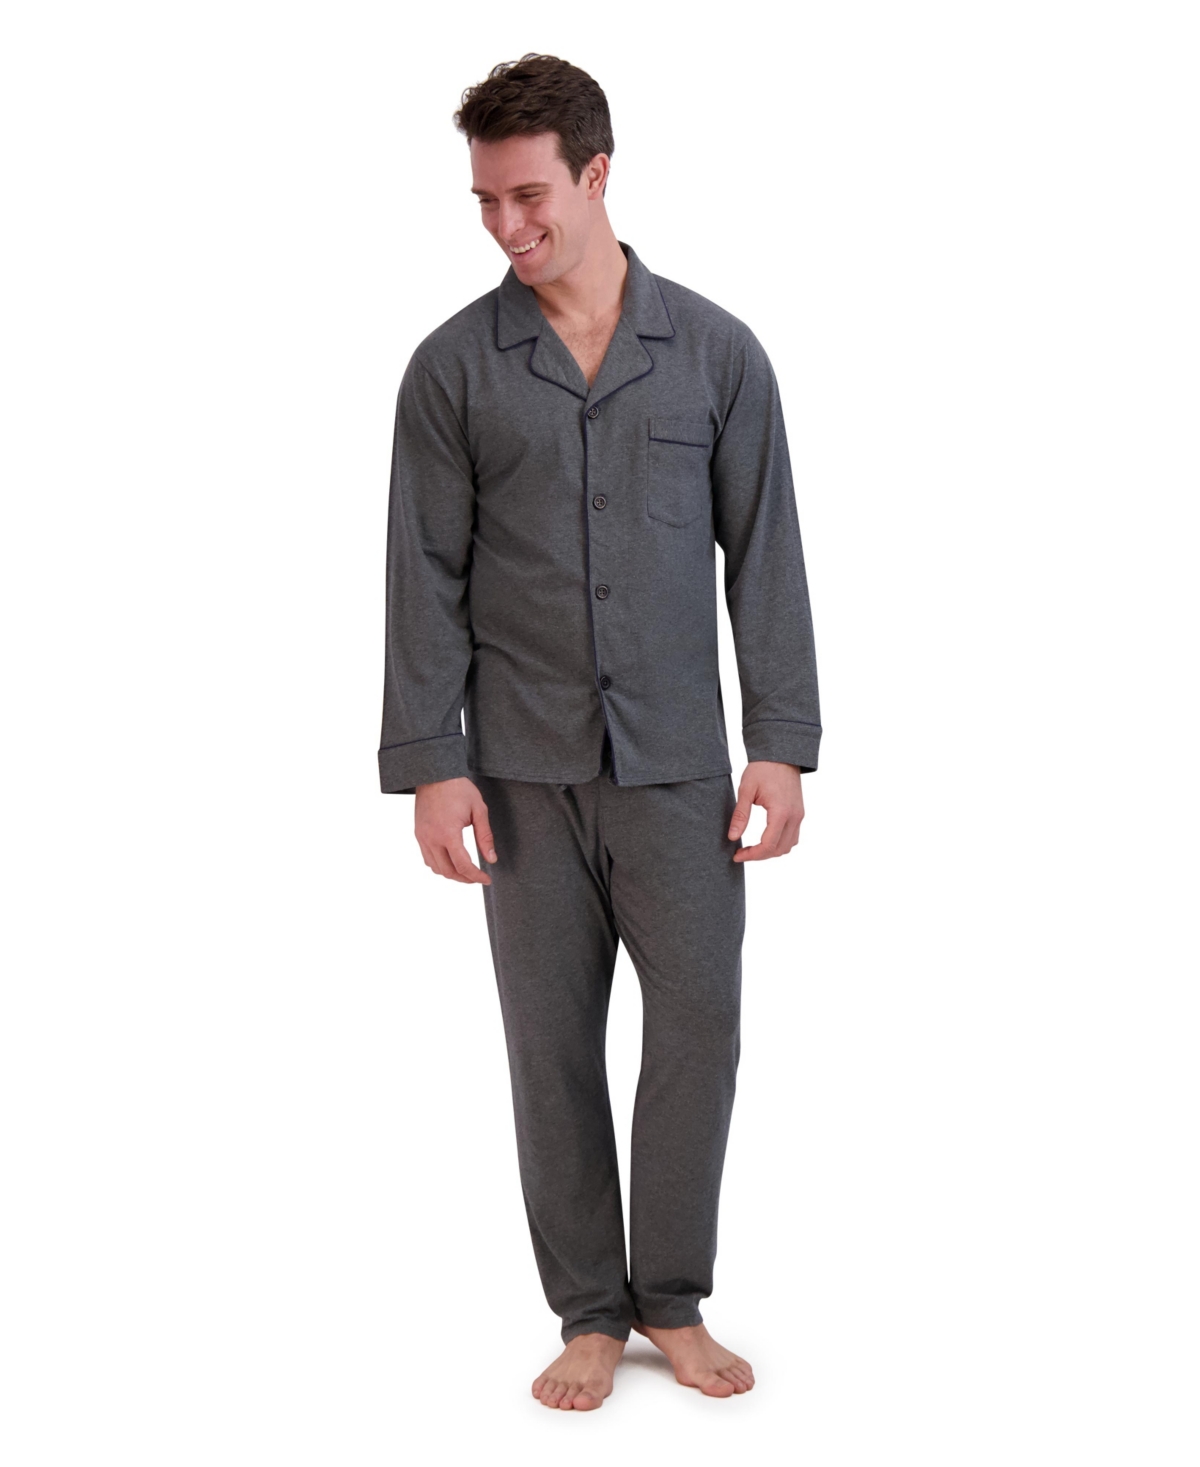 Hanes Men's Big And Tall Cotton Modal Knit Pajama, 2 Piece Set In Charcoal Heather Gray